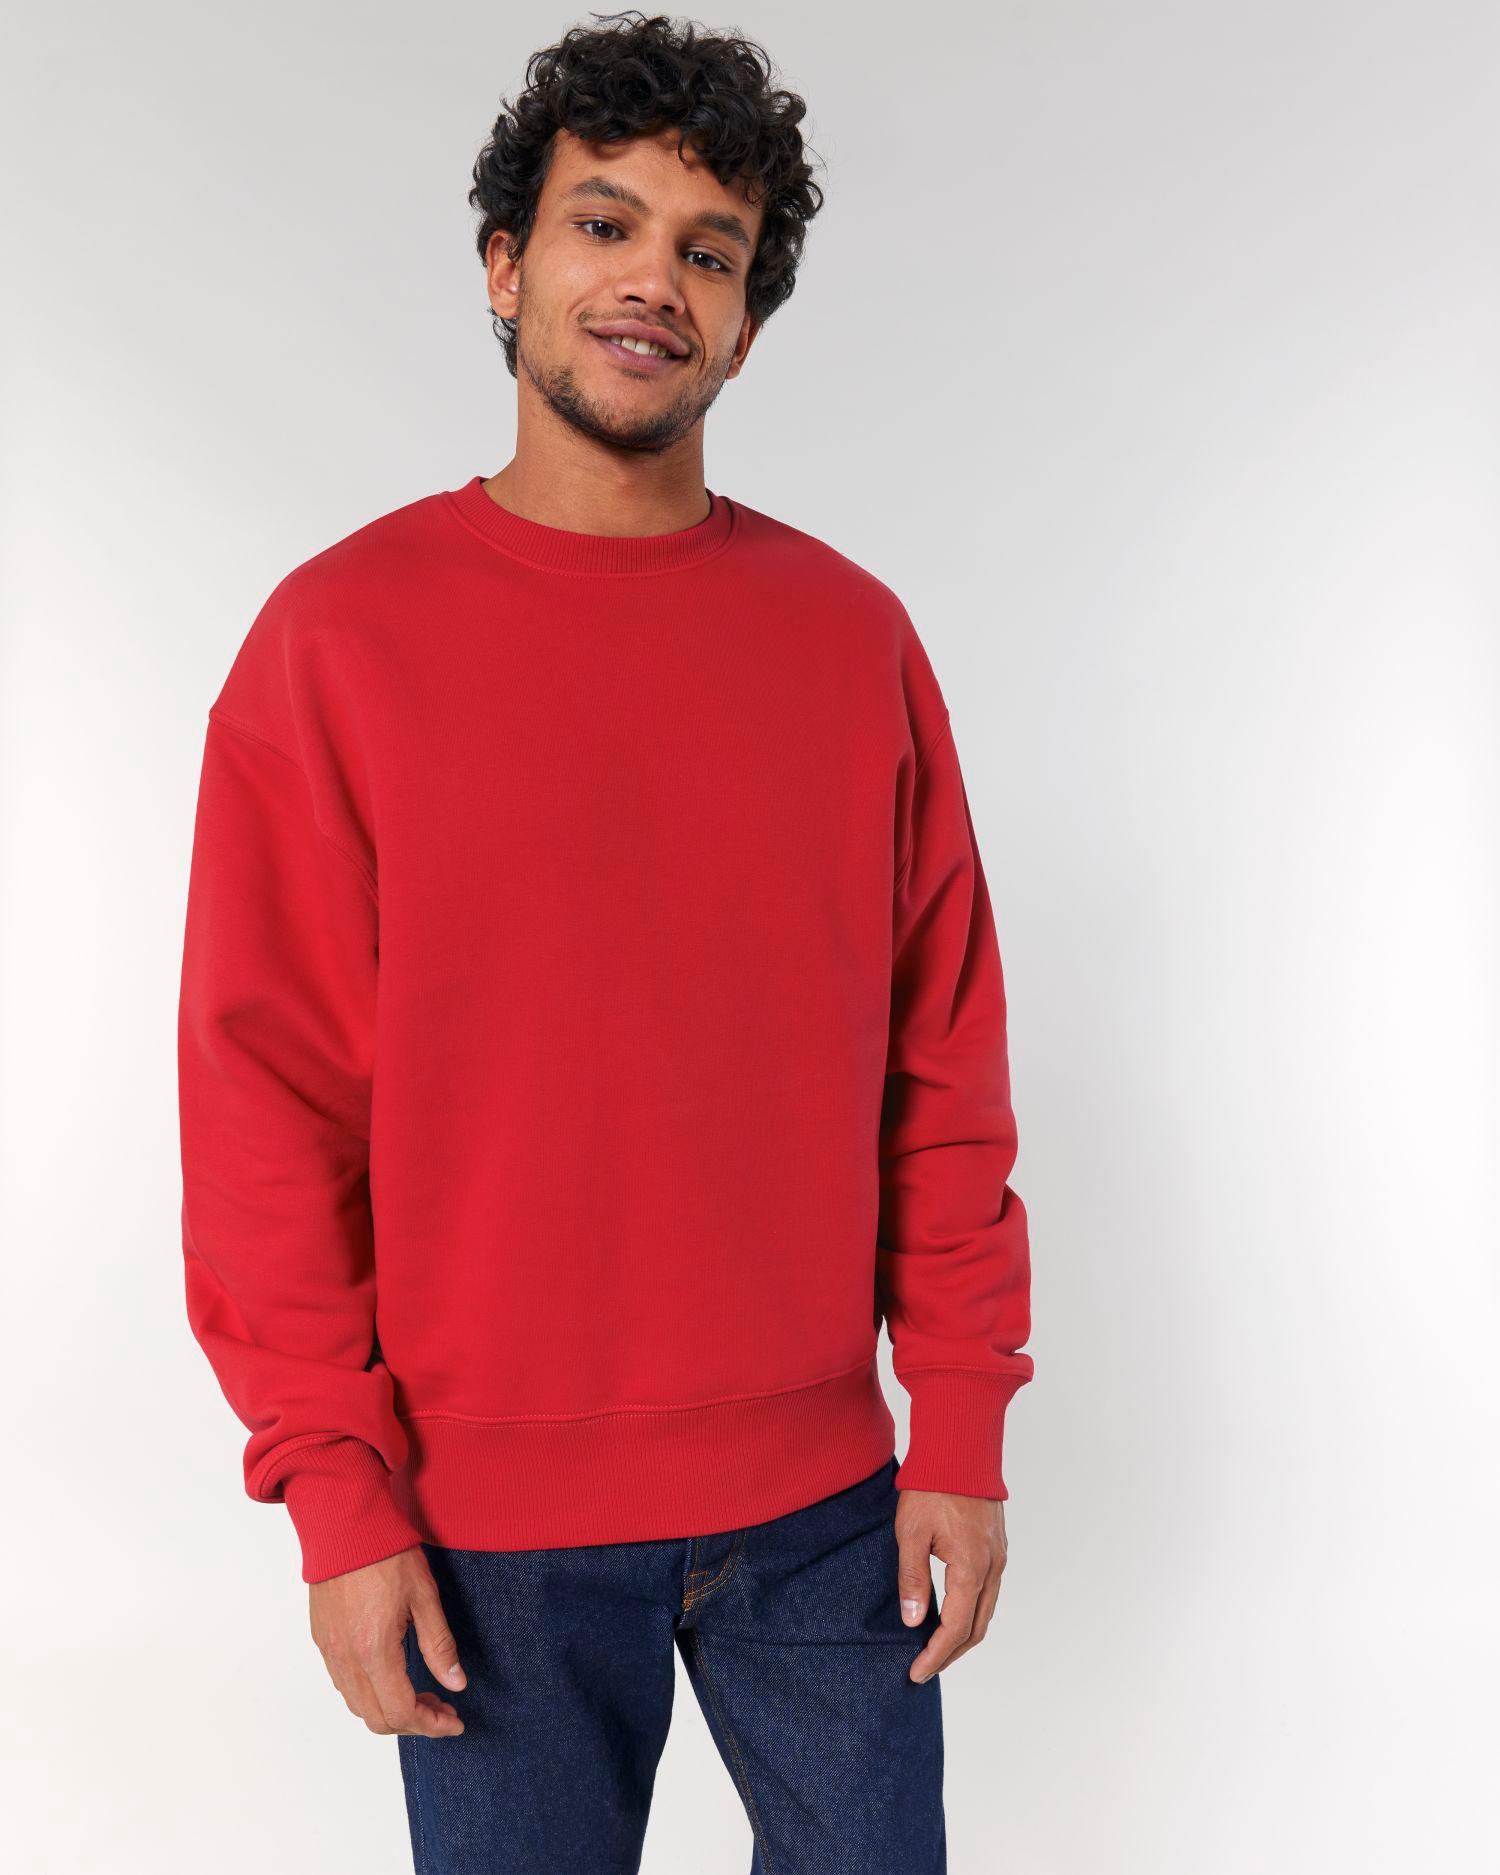 Sweat Shirt Col Rond Décontracté Unisexe Stanley Radder Red